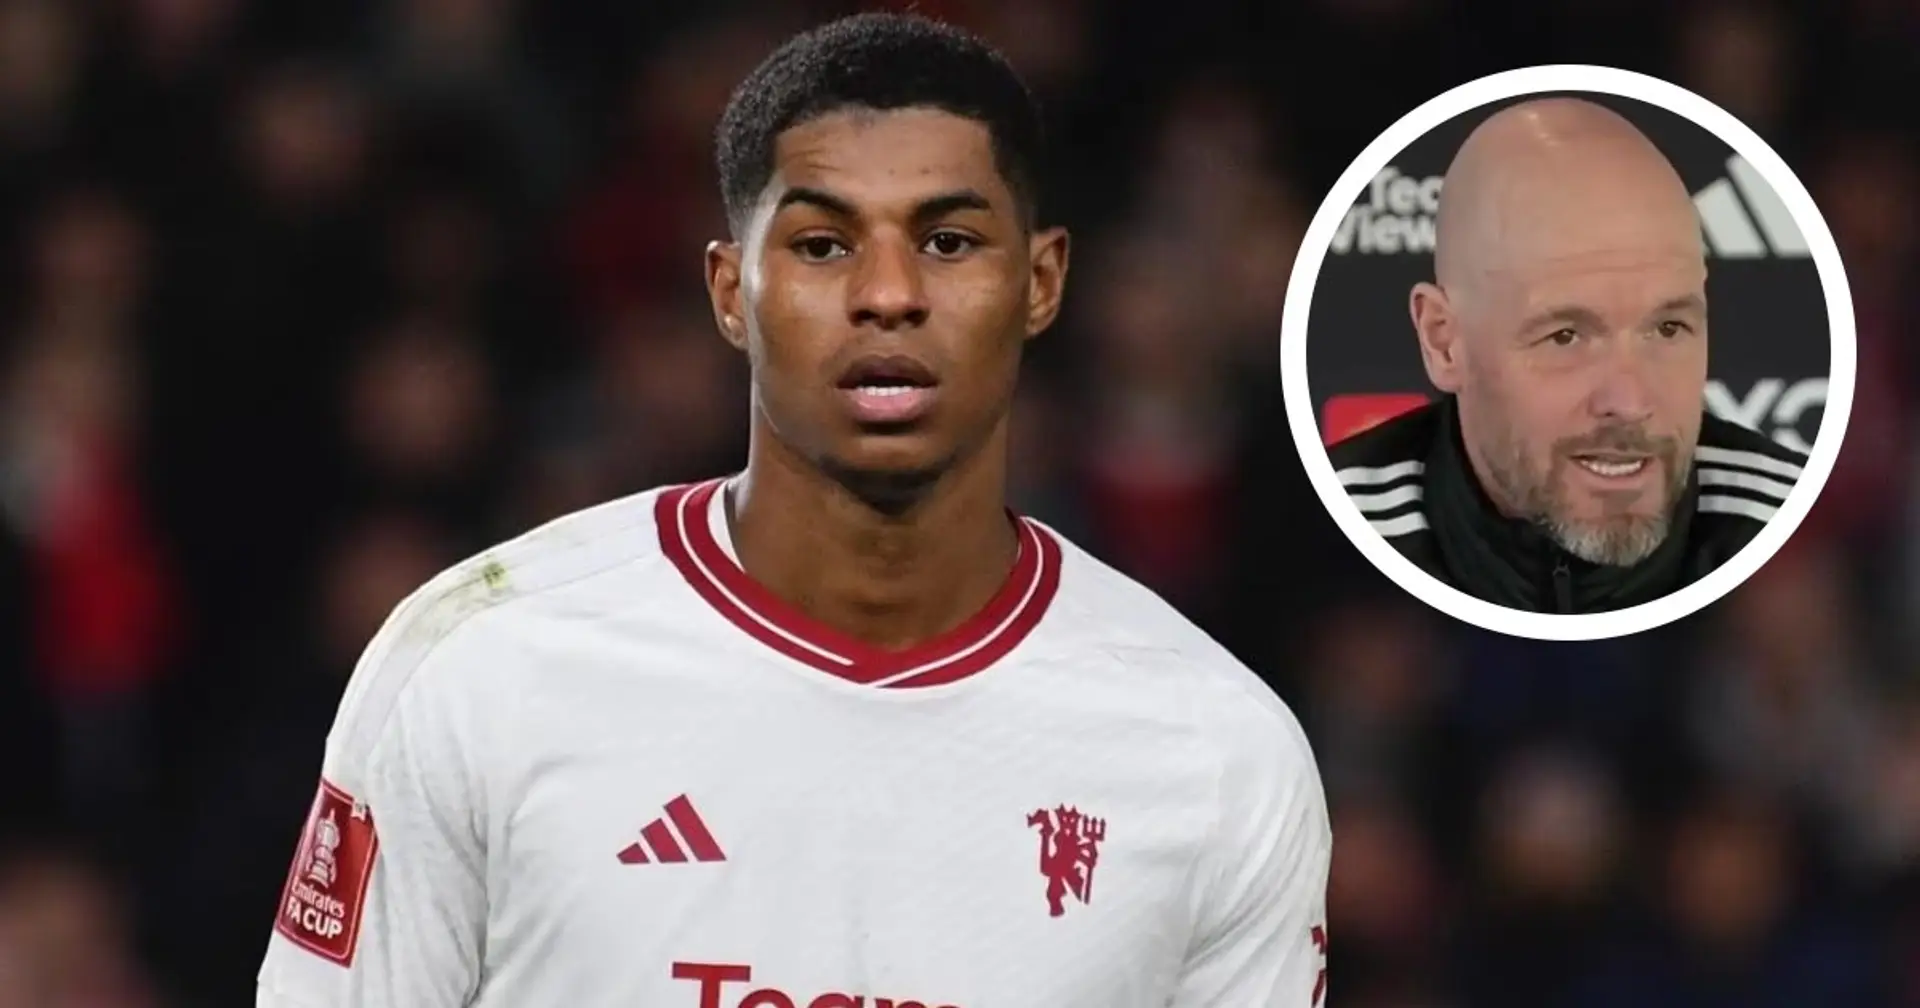 'He knows there is a lot of competition': Ten Hag sets fresh challenge for Rashford amid Euro 2024 snub threat